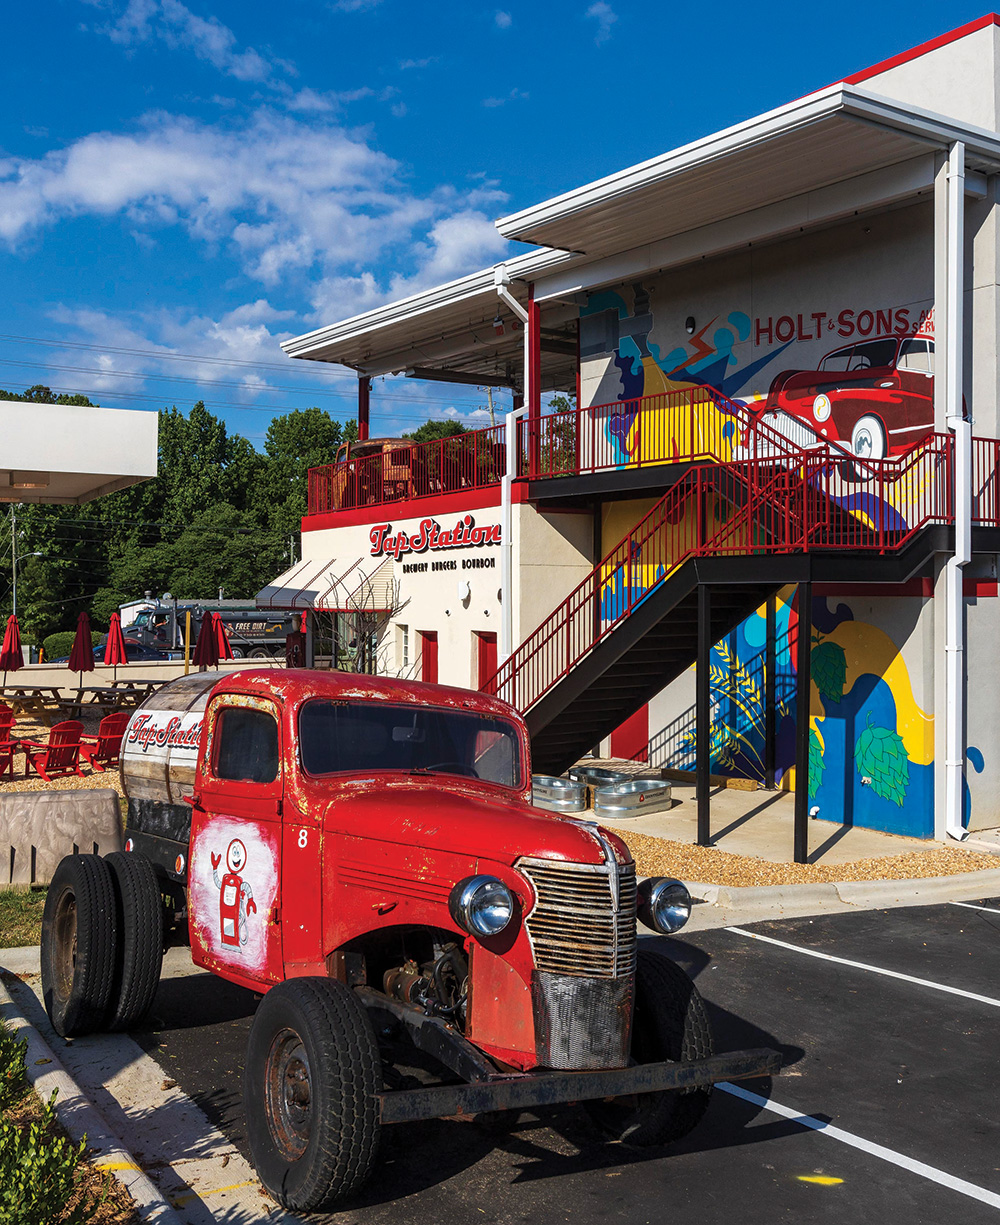 TapStation in Apex pays homage to Holt & Sons, a longtime automobile service station.